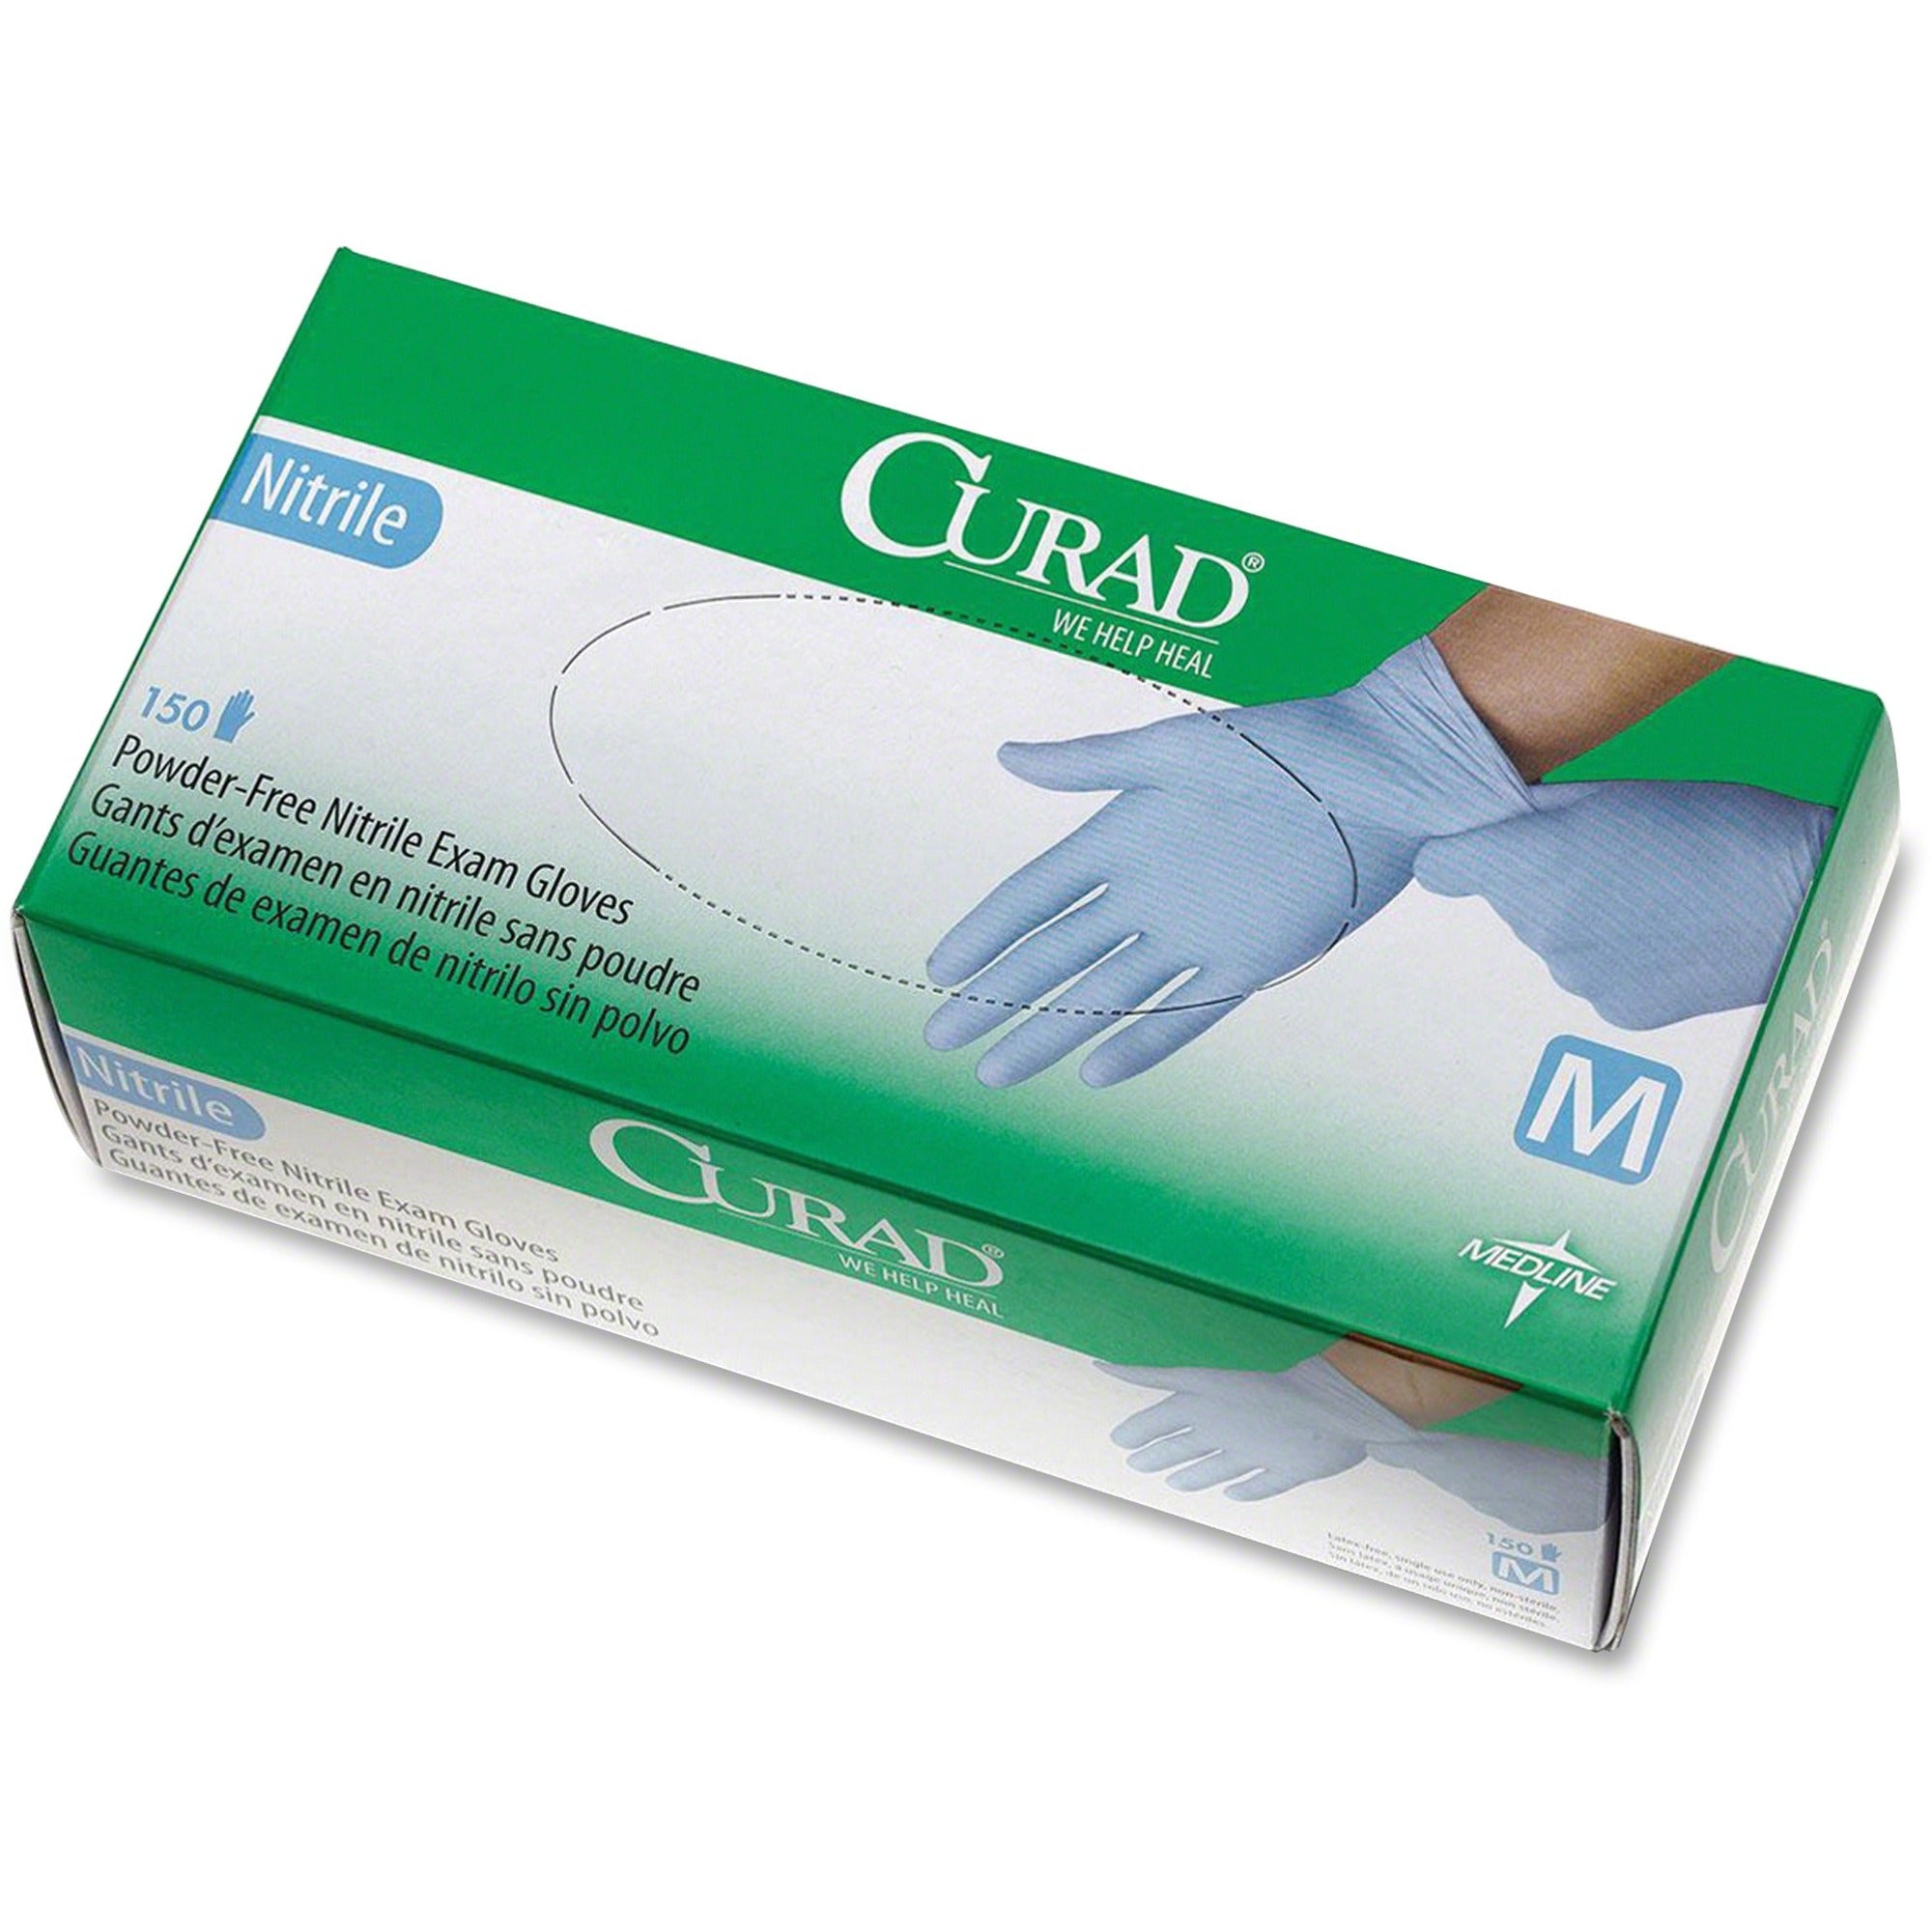 Curad Powder-free Nitrile Disposable Exam Gloves - Medium Size - Full-Textured Design - Blue - Latex-free, Non-sterile, Chemical Resistant - For Medical - 150 / Box - 9.50" Glove Length - 